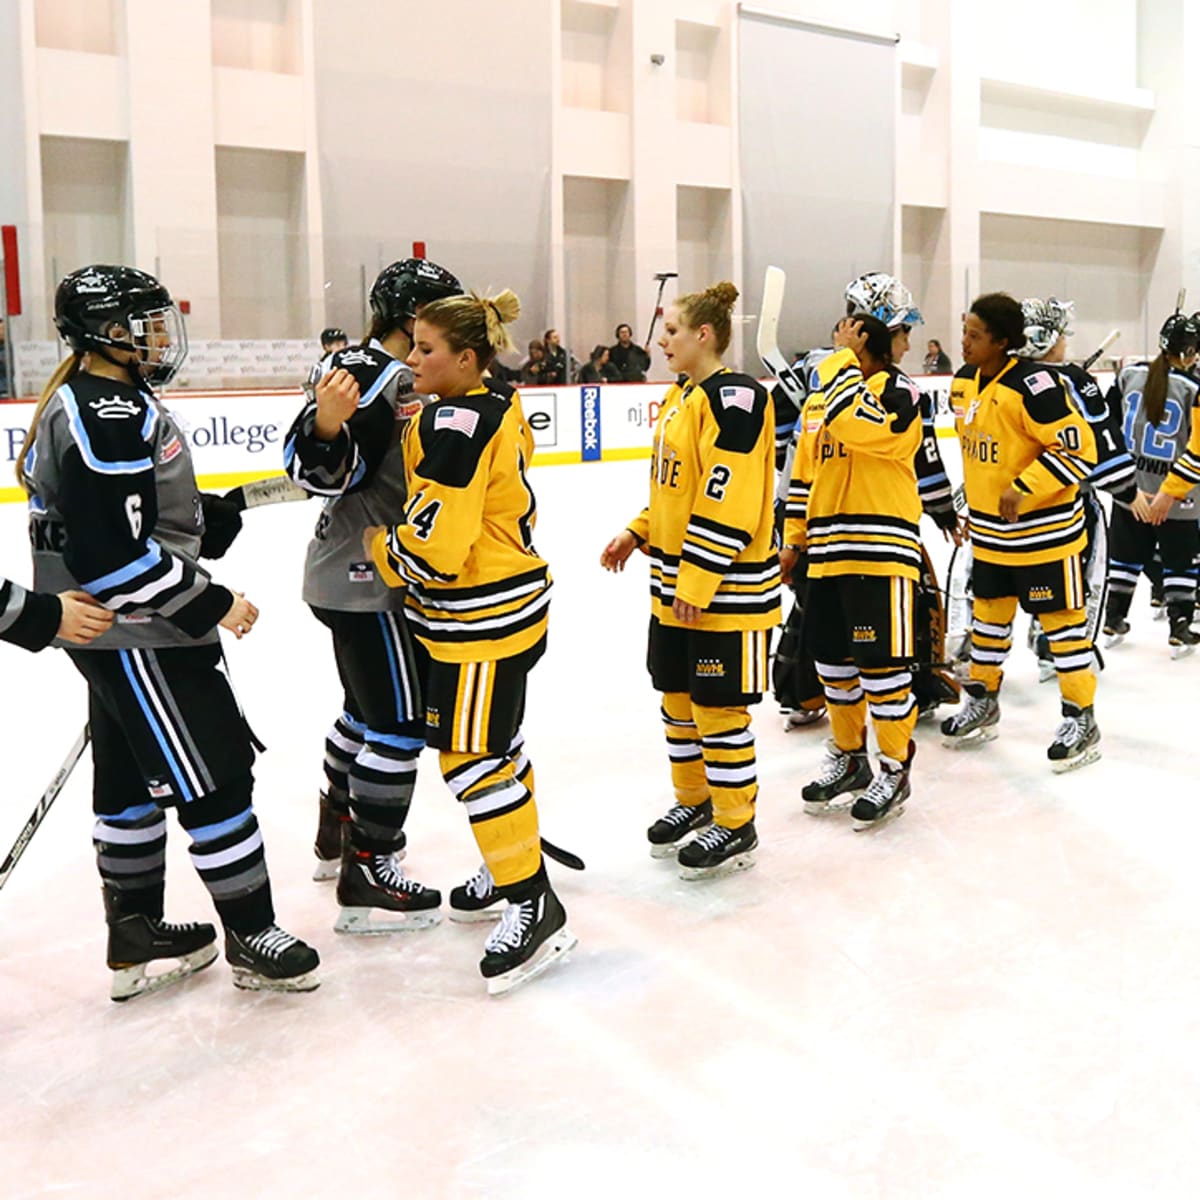 NWHL opens shop and reveals jerseys, portion of profit goes to players -  The Hockey News